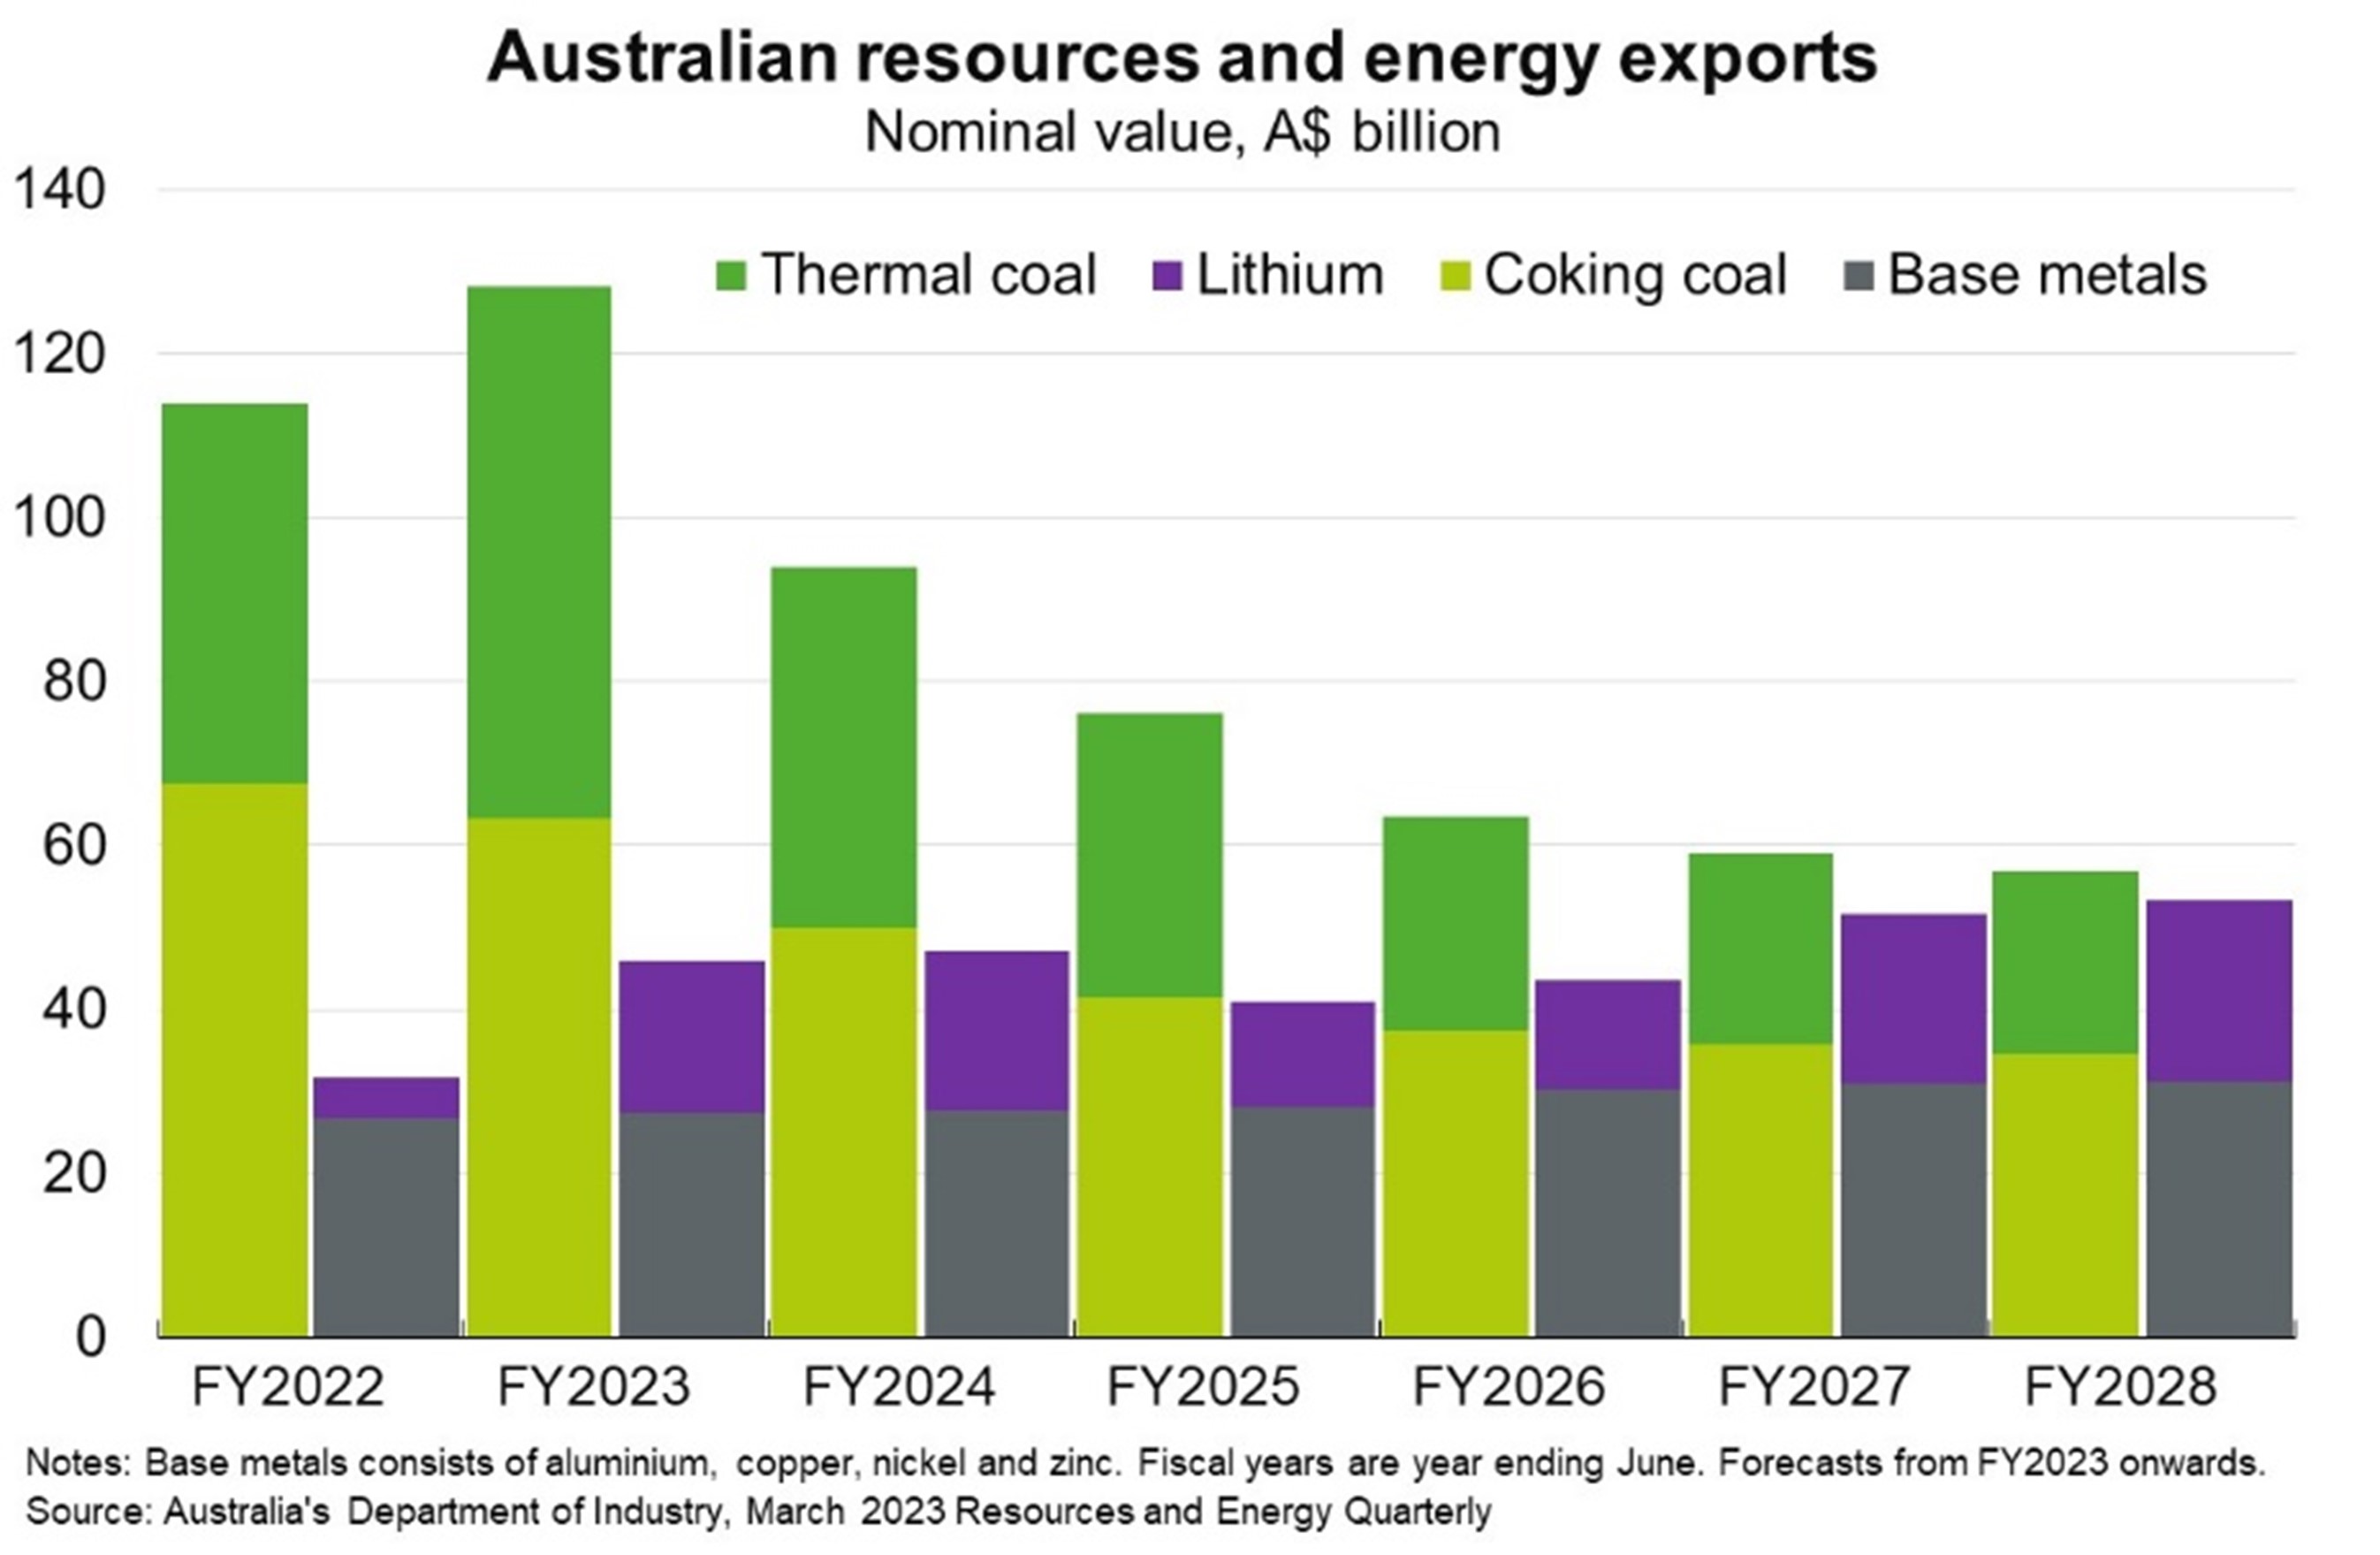 Lithium exports forecast to triple to $19 billion in 2022-23 and match that of thermal coal by 2027-28, as demand for clean energy rises and fossil fuel prices and usage declines 